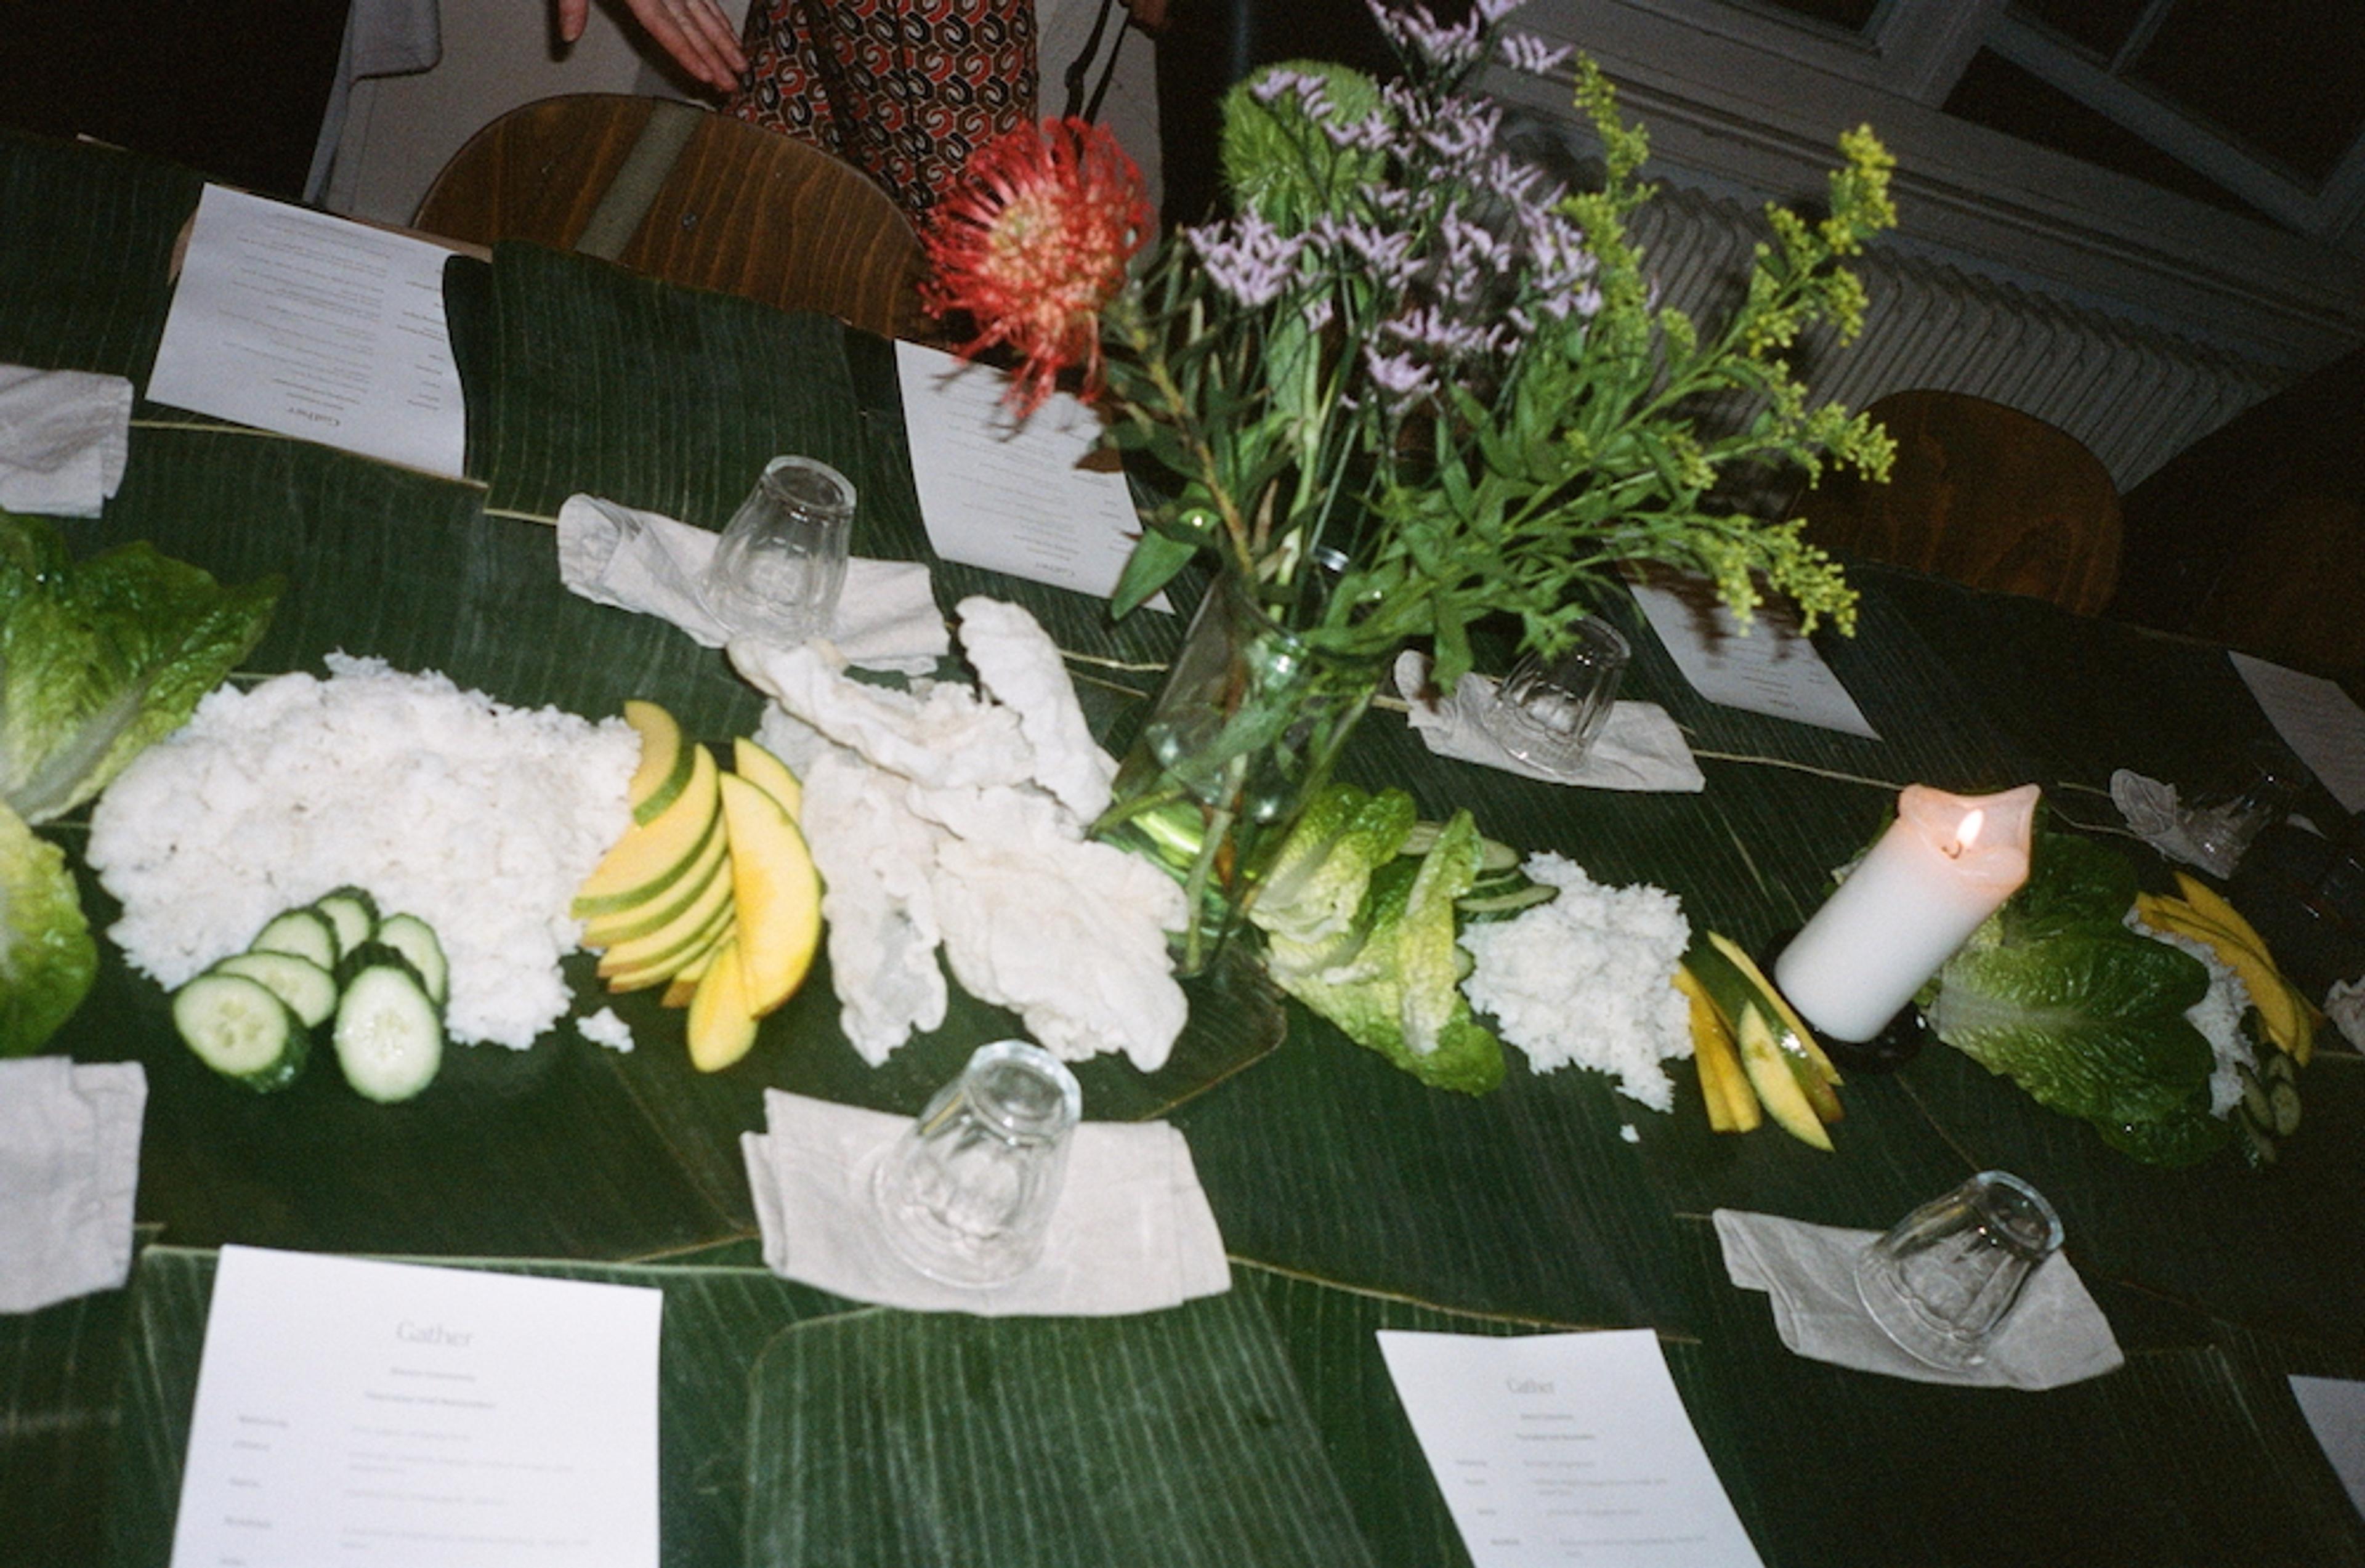 A beautiful display of appetizing food items which are presented on a table, ready to be served.